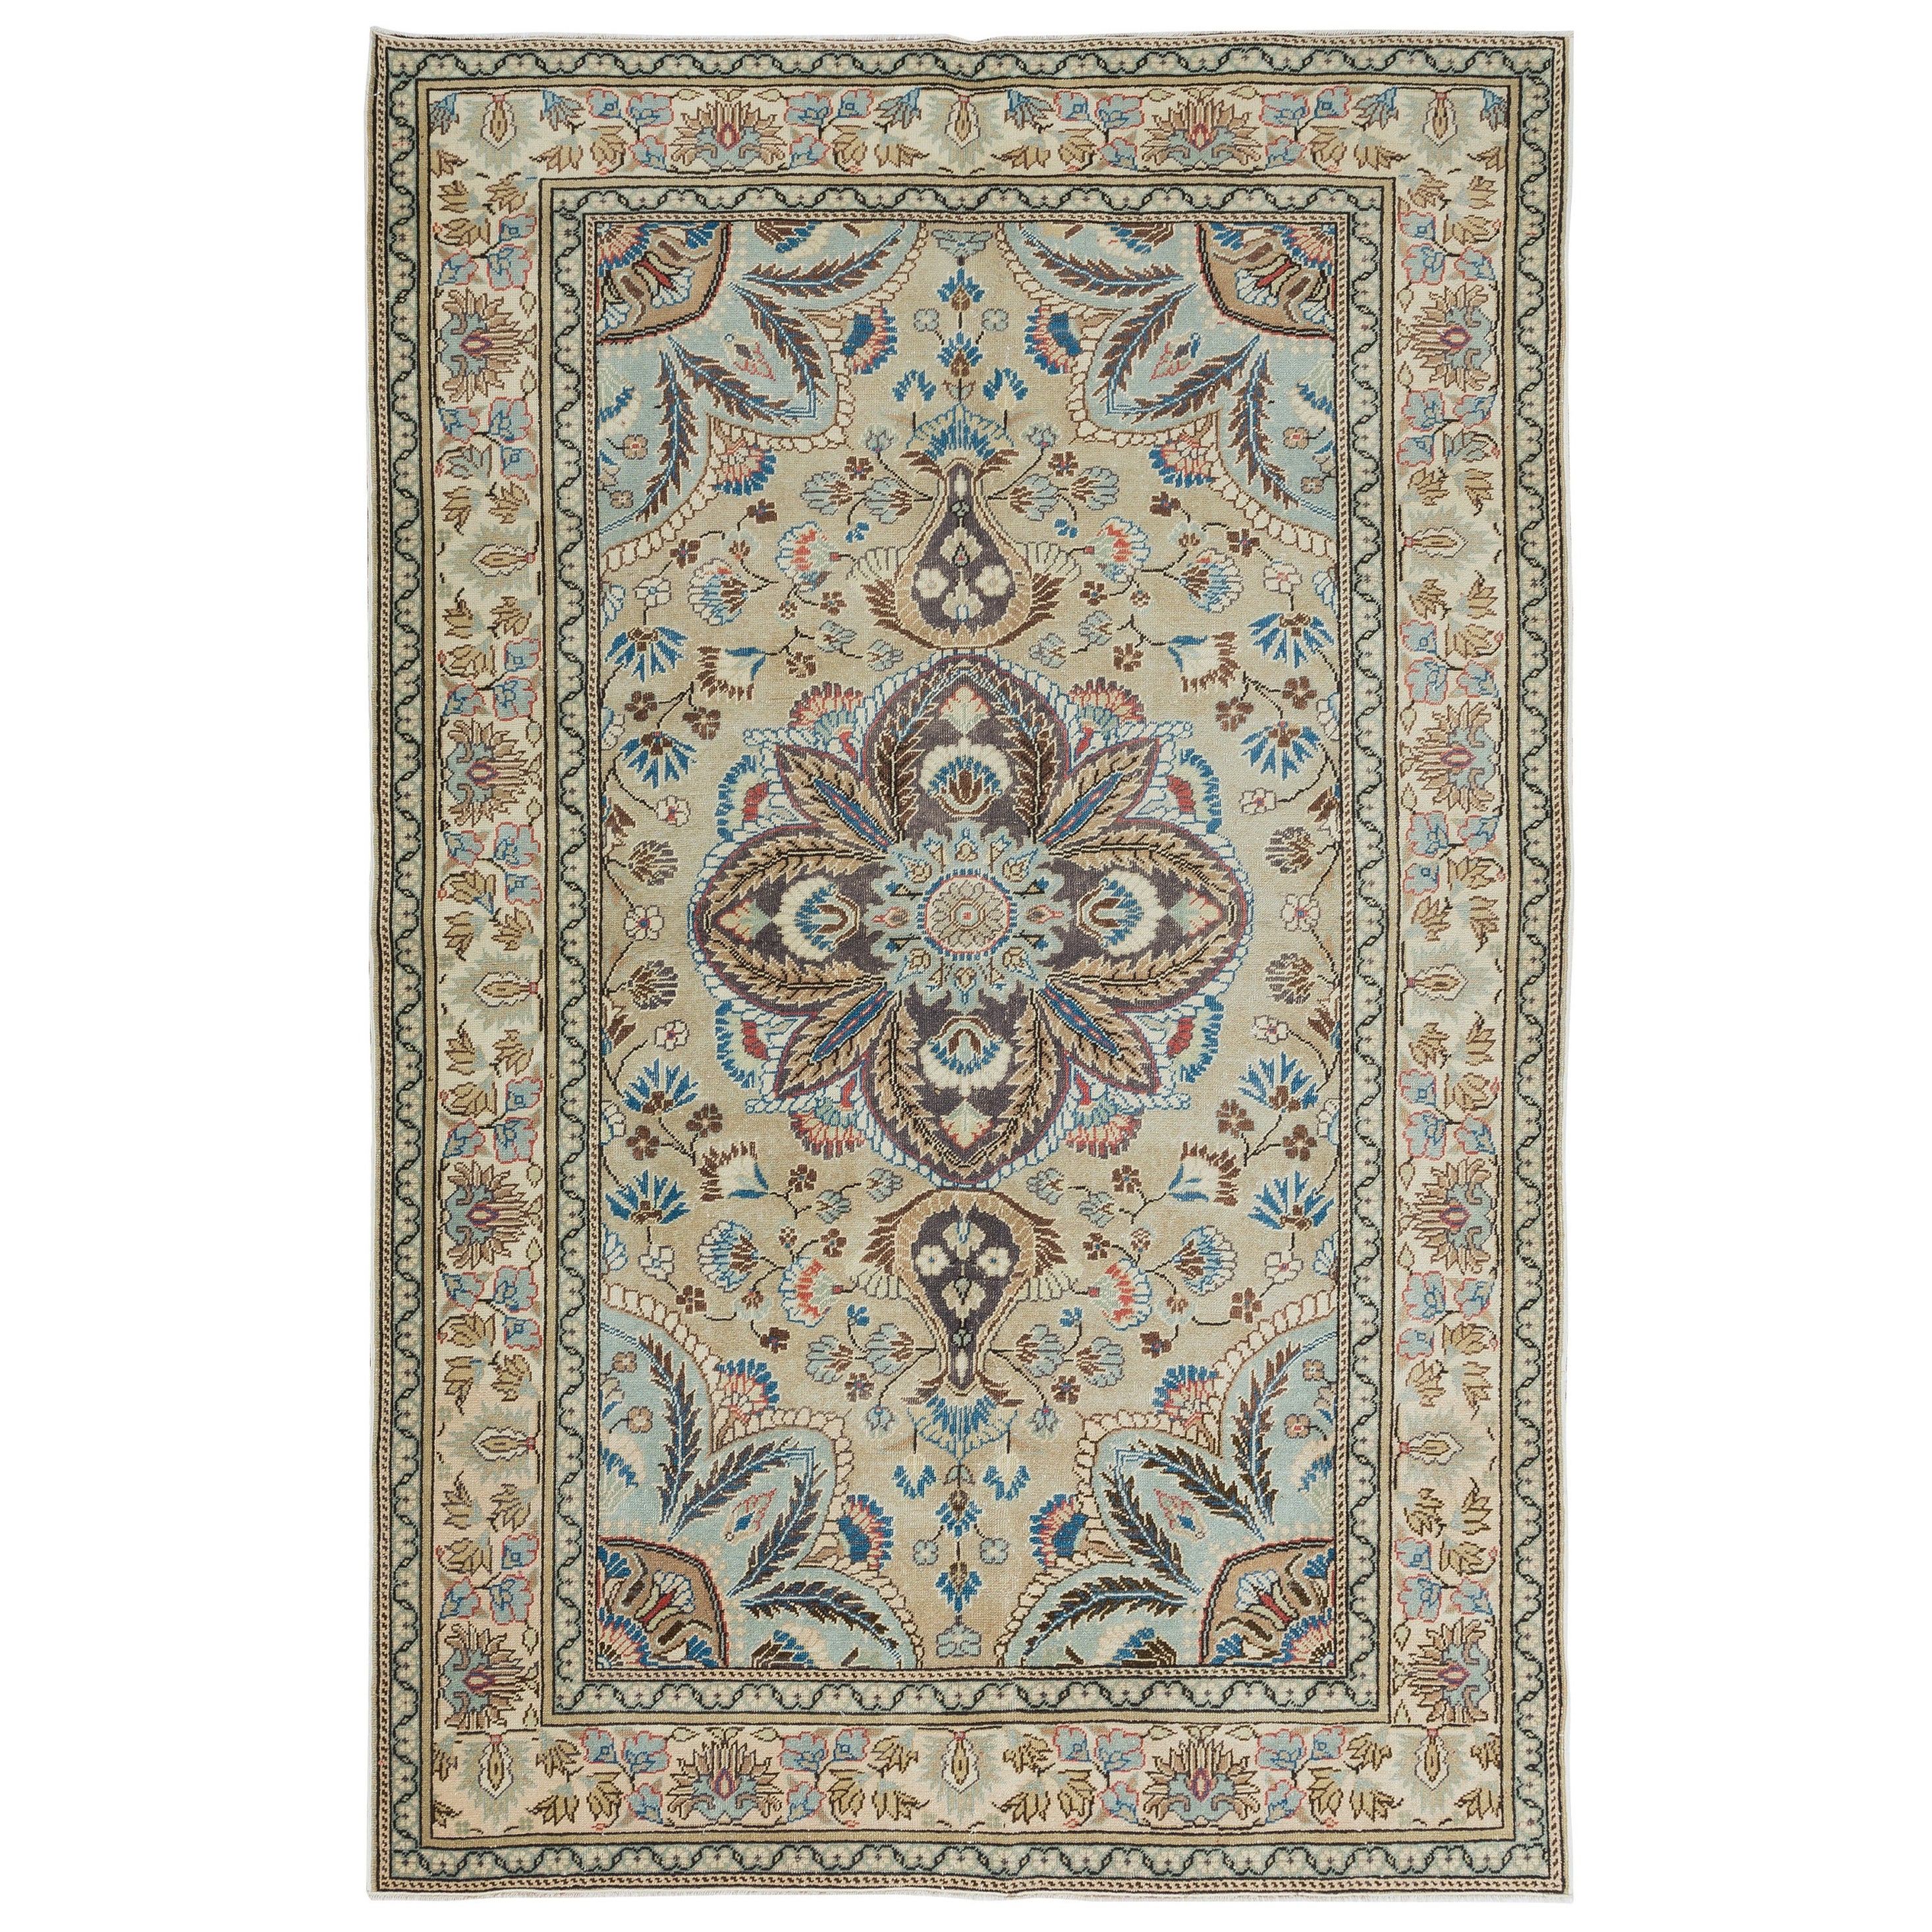 4.6x7.3 Ft Elegant Vintage Hand-Knotted Wool Area Rug from Central Anatolia